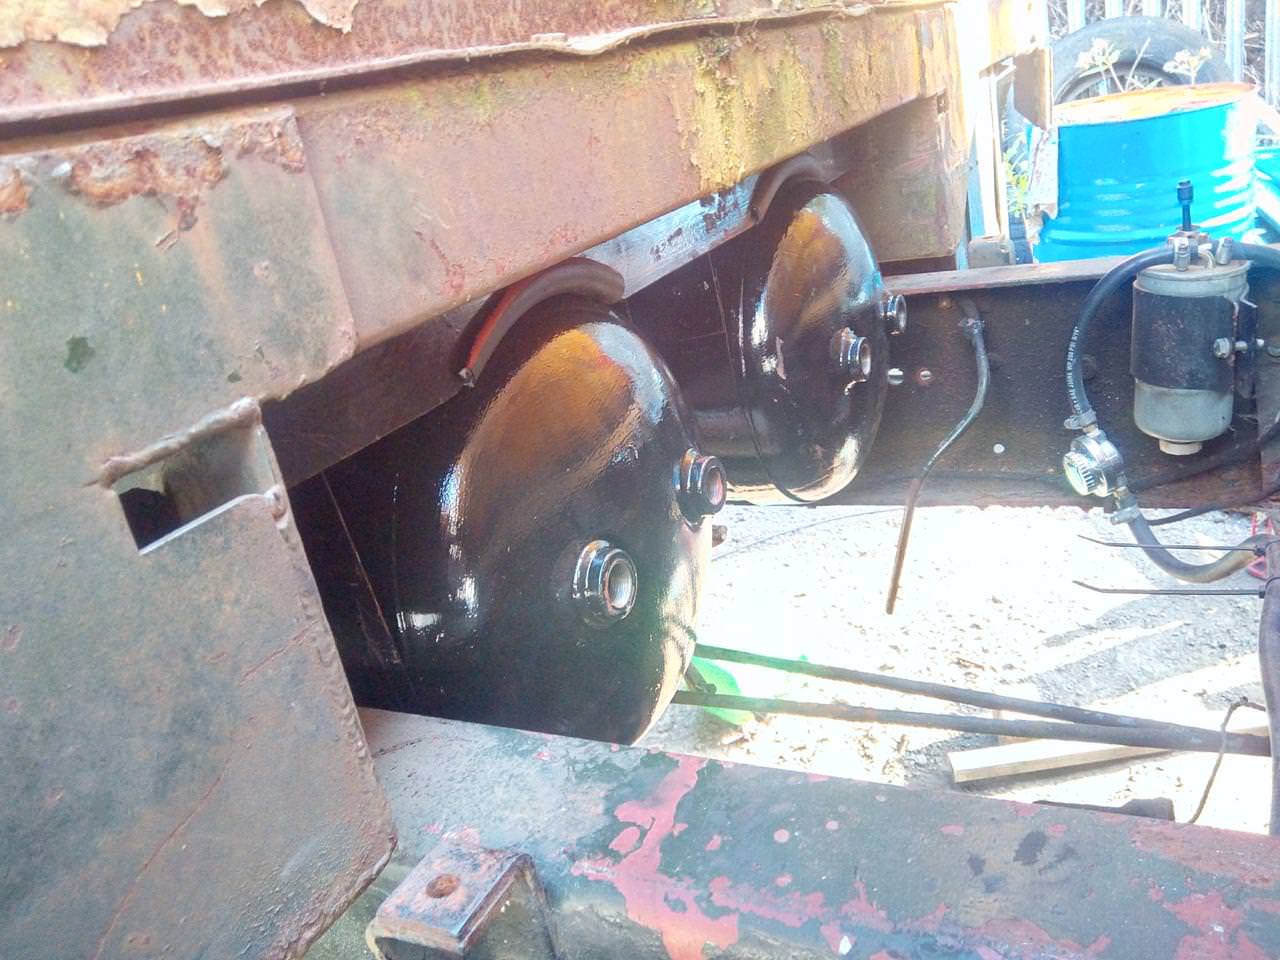 The air tanks re-fitted to the bracket, now fully tucked up into
the underside of the truck's body.